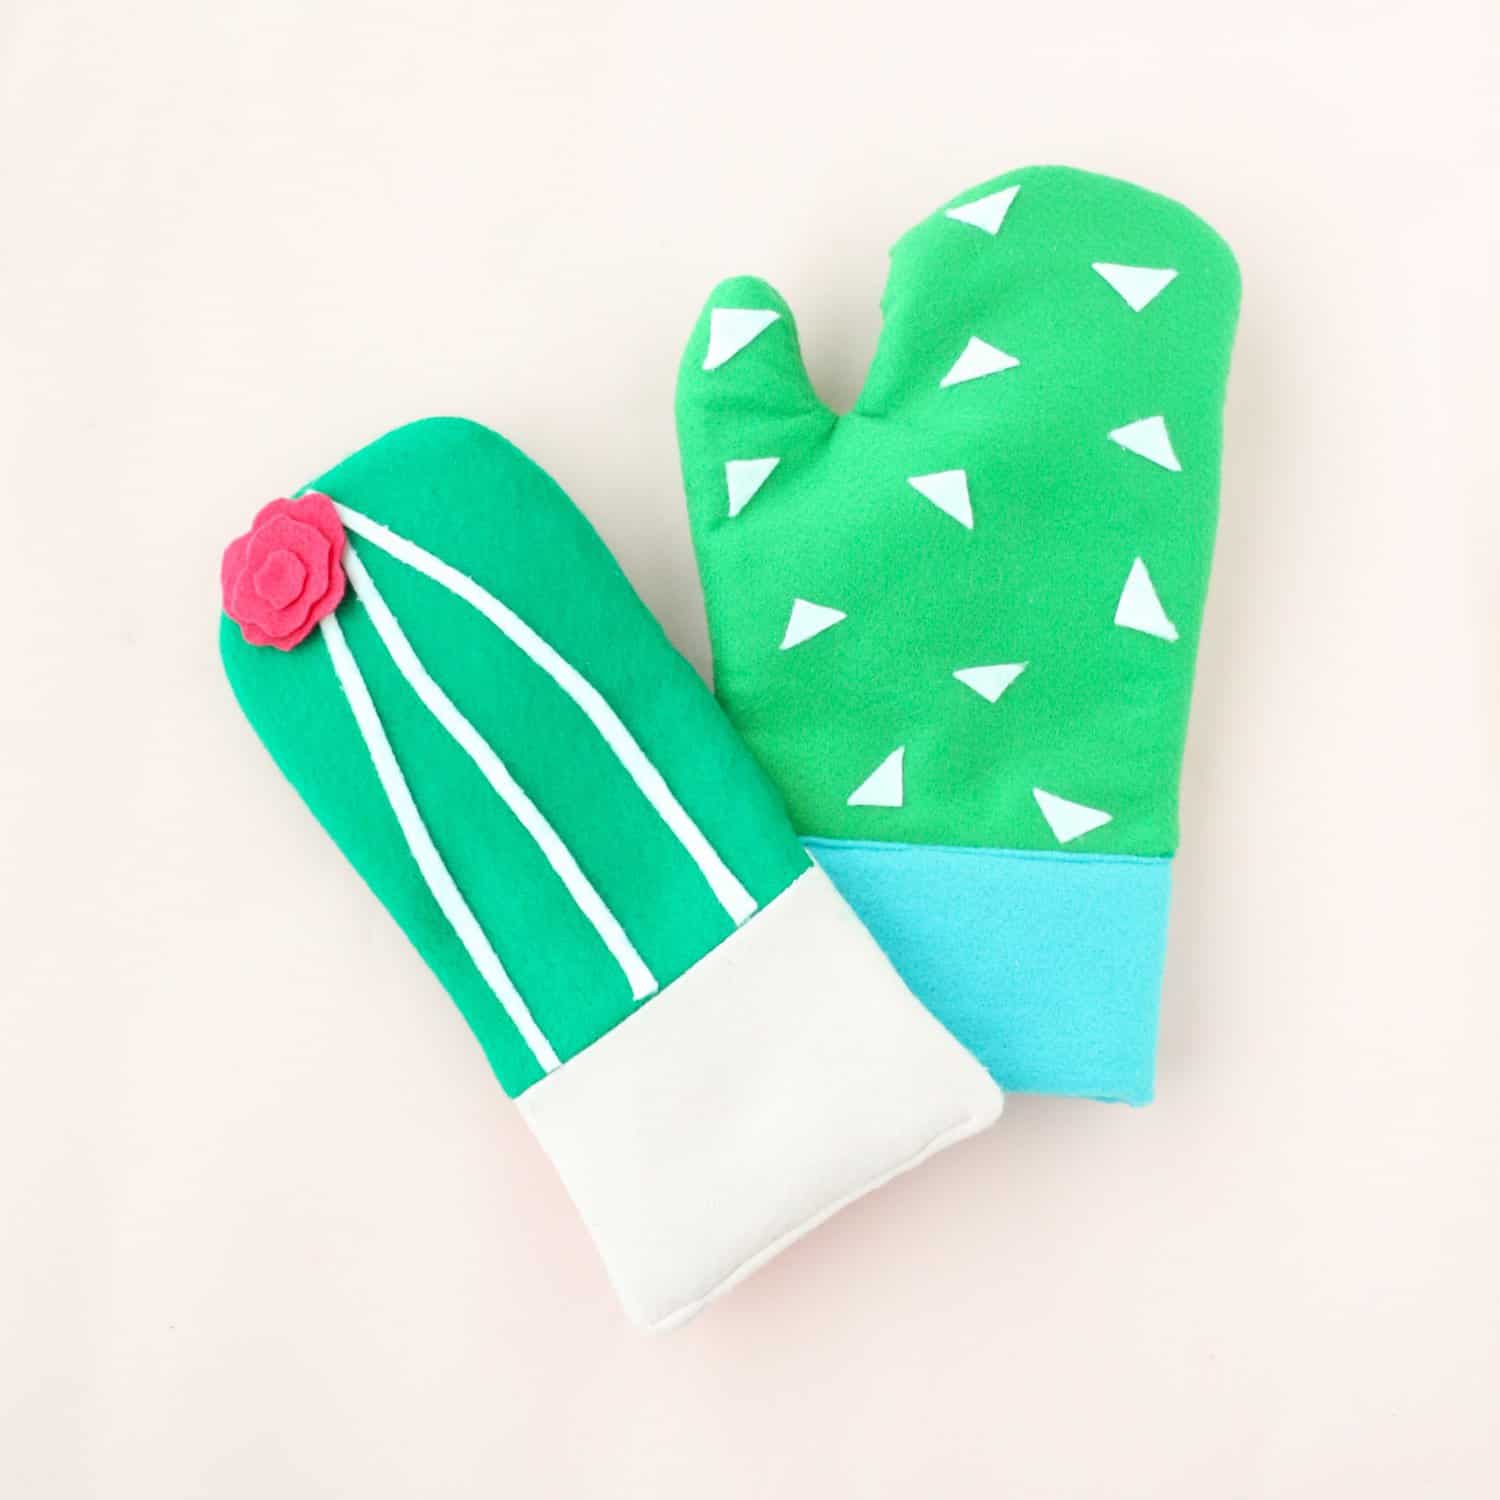 DIY-Cactus-Oven-Mitts-Click-Through-for-Tutorial